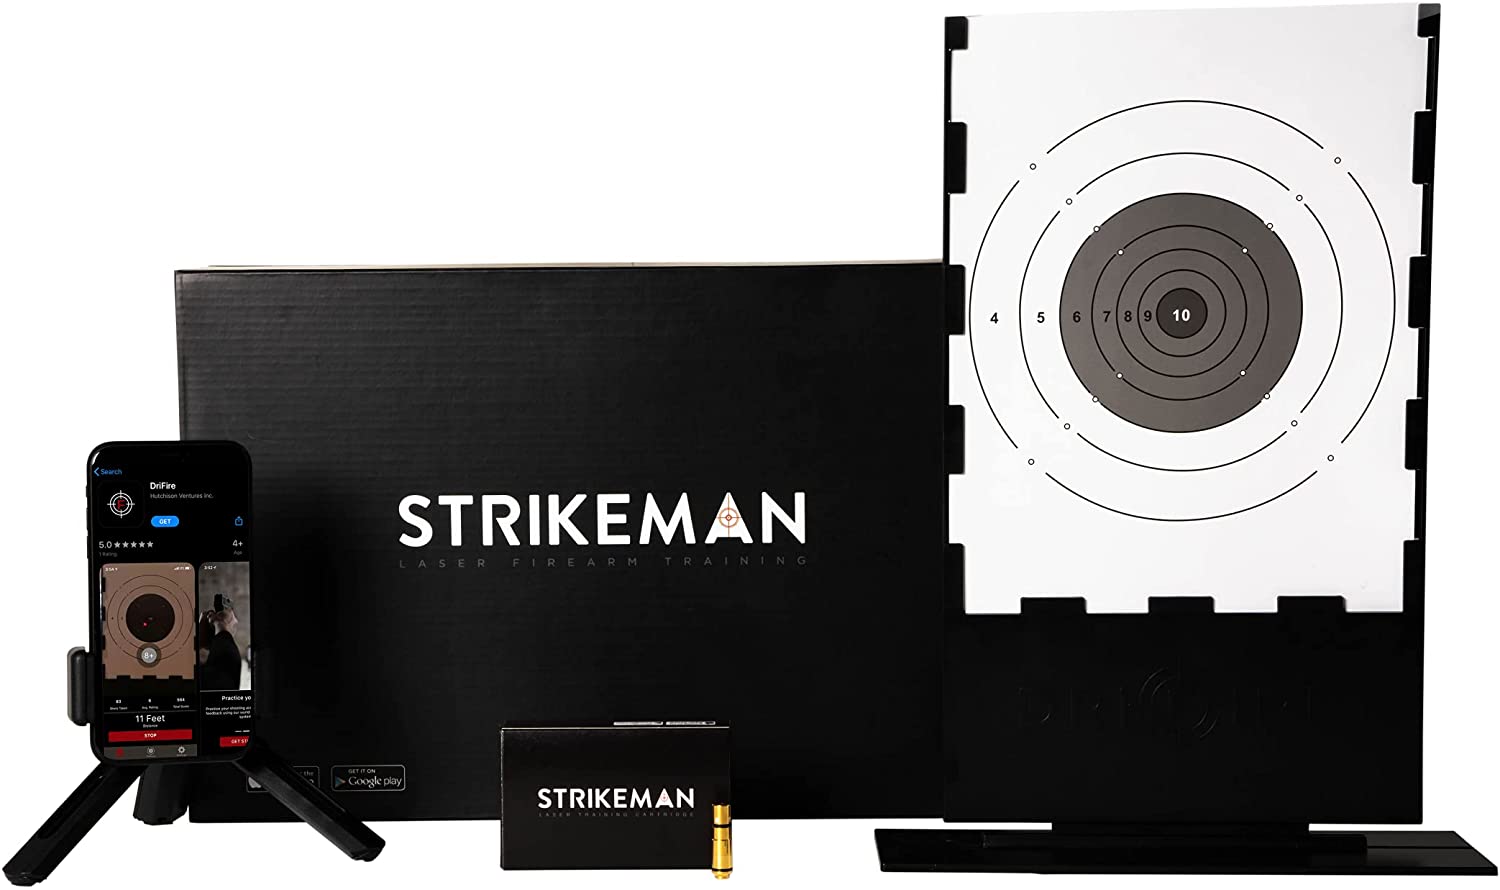 Strikeman - Dry Fire Training Kit with .243 Winchester Ammo Bullet & Downloadable App